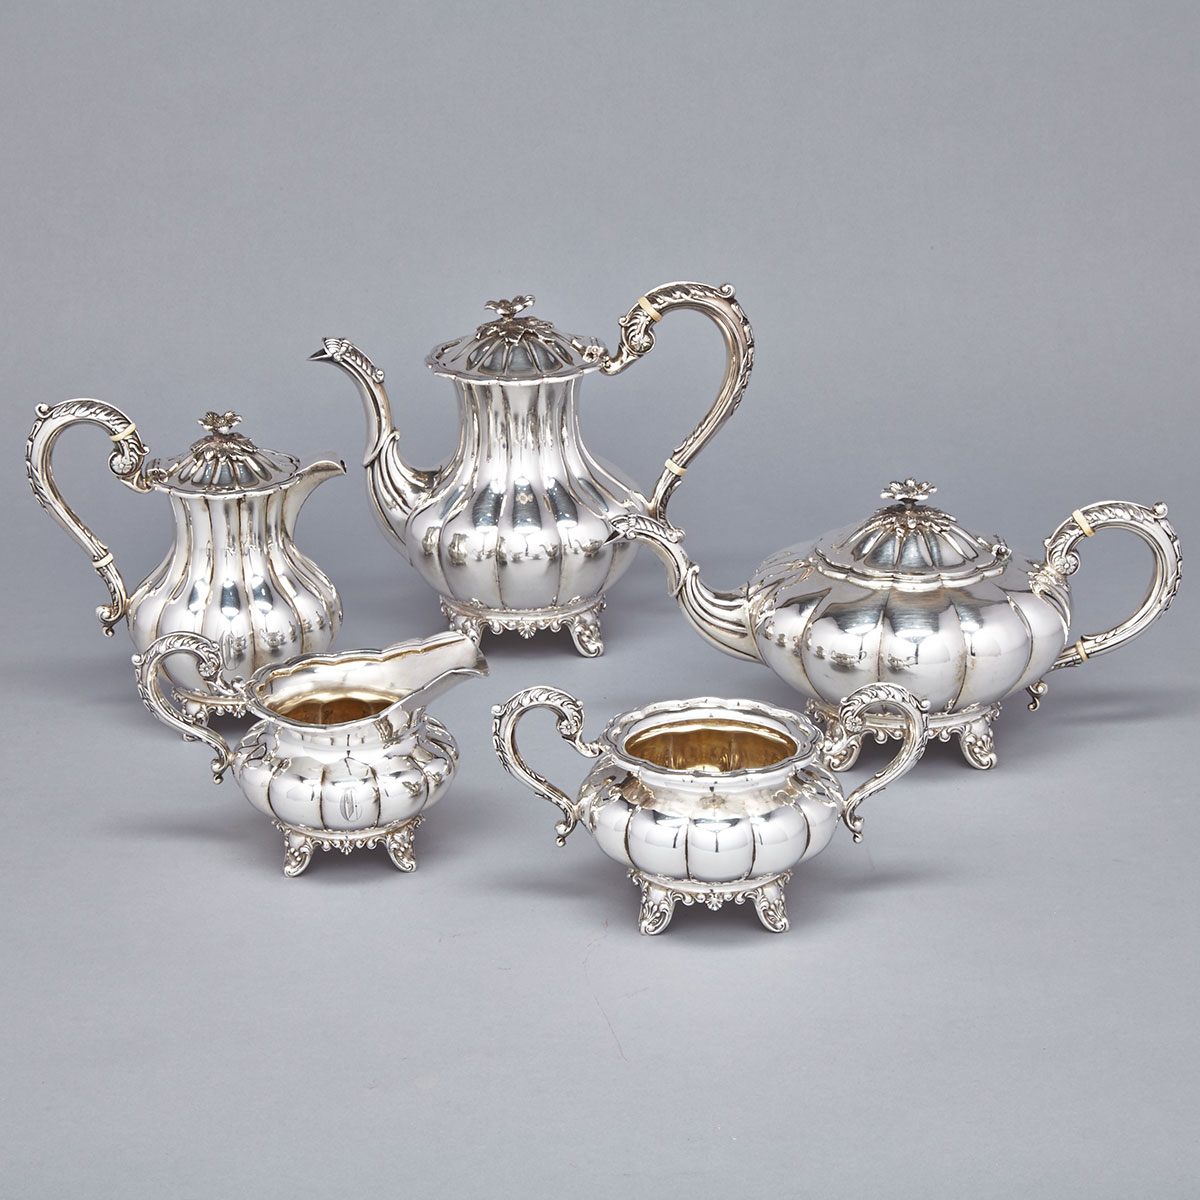 Canadian Silver Tea and Coffee Service, Henry Birks & Sons, Montreal, Que., 1941/42